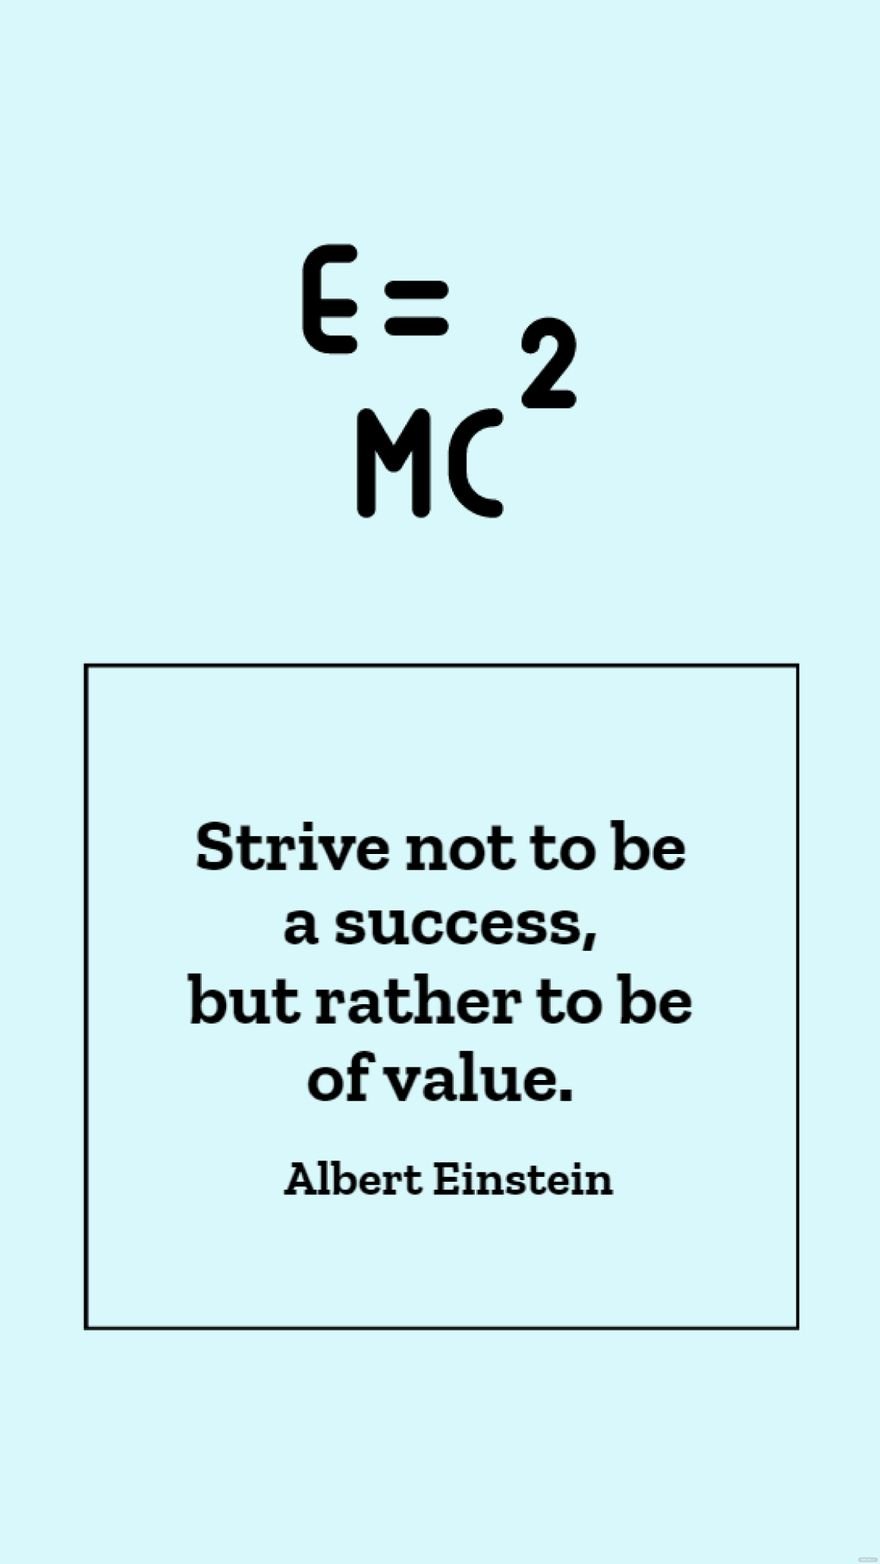 Free Albert Einstein - Strive not to be a success, but rather to be of value. in JPG